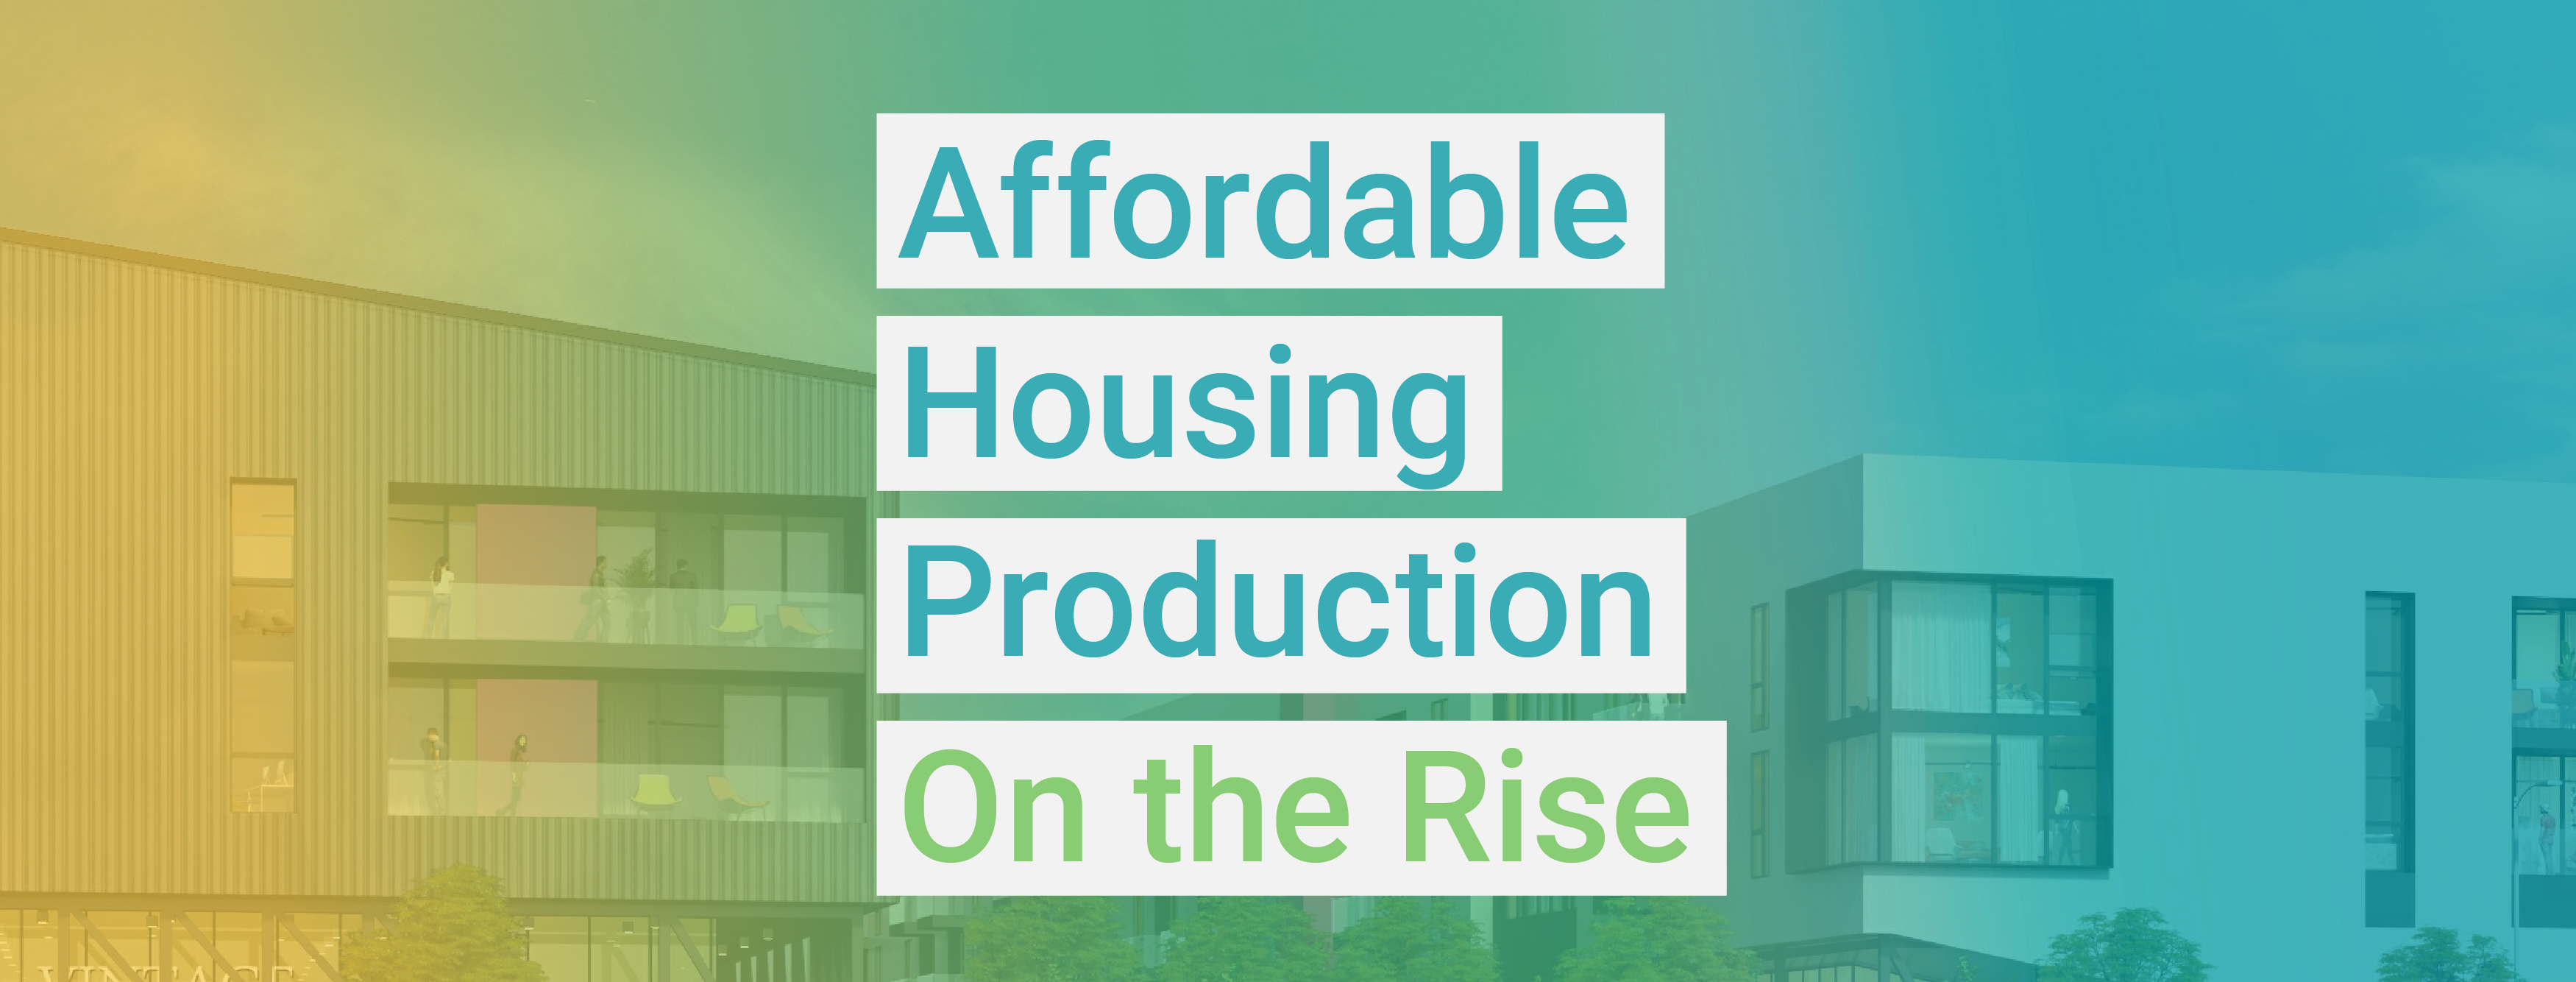 Affordable Housing Production On the Rise